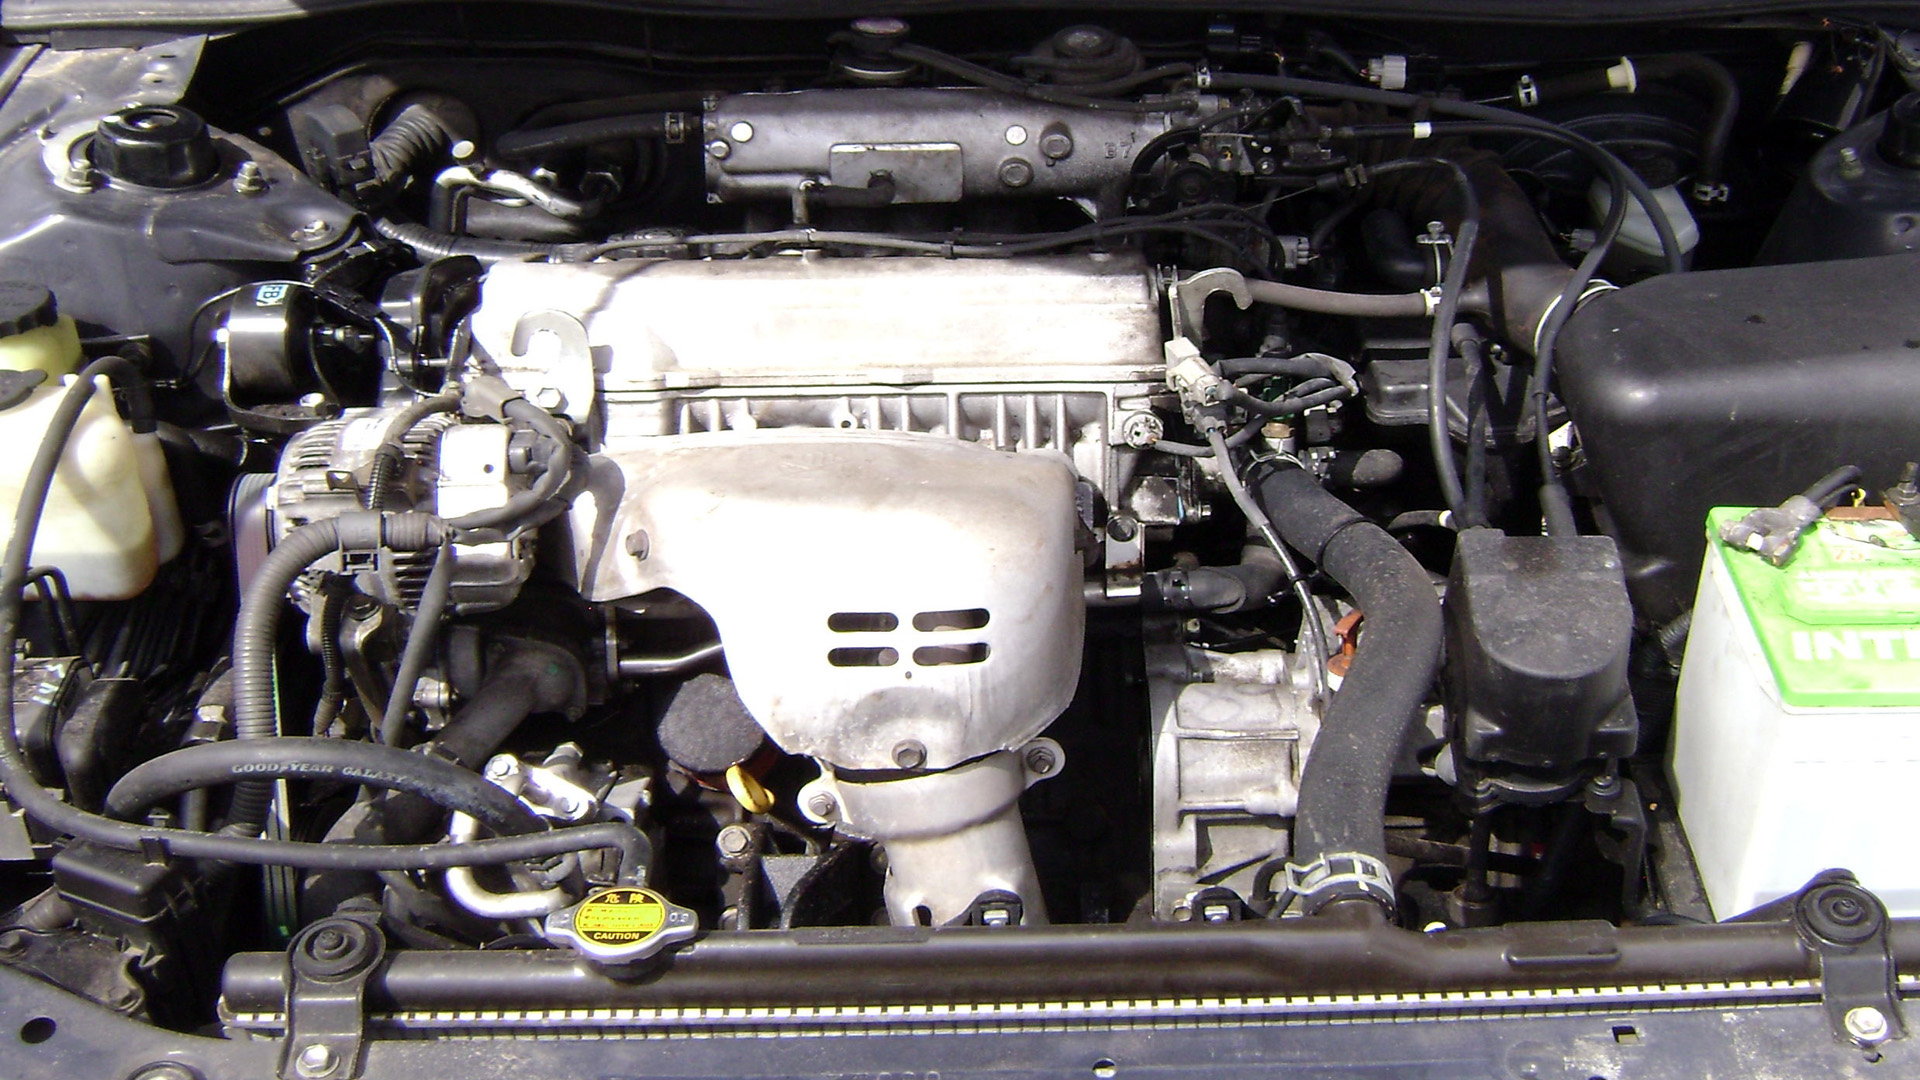 Toyota Camry 1997-2001: Engine Noise Diagnostic Guide | Camryforums